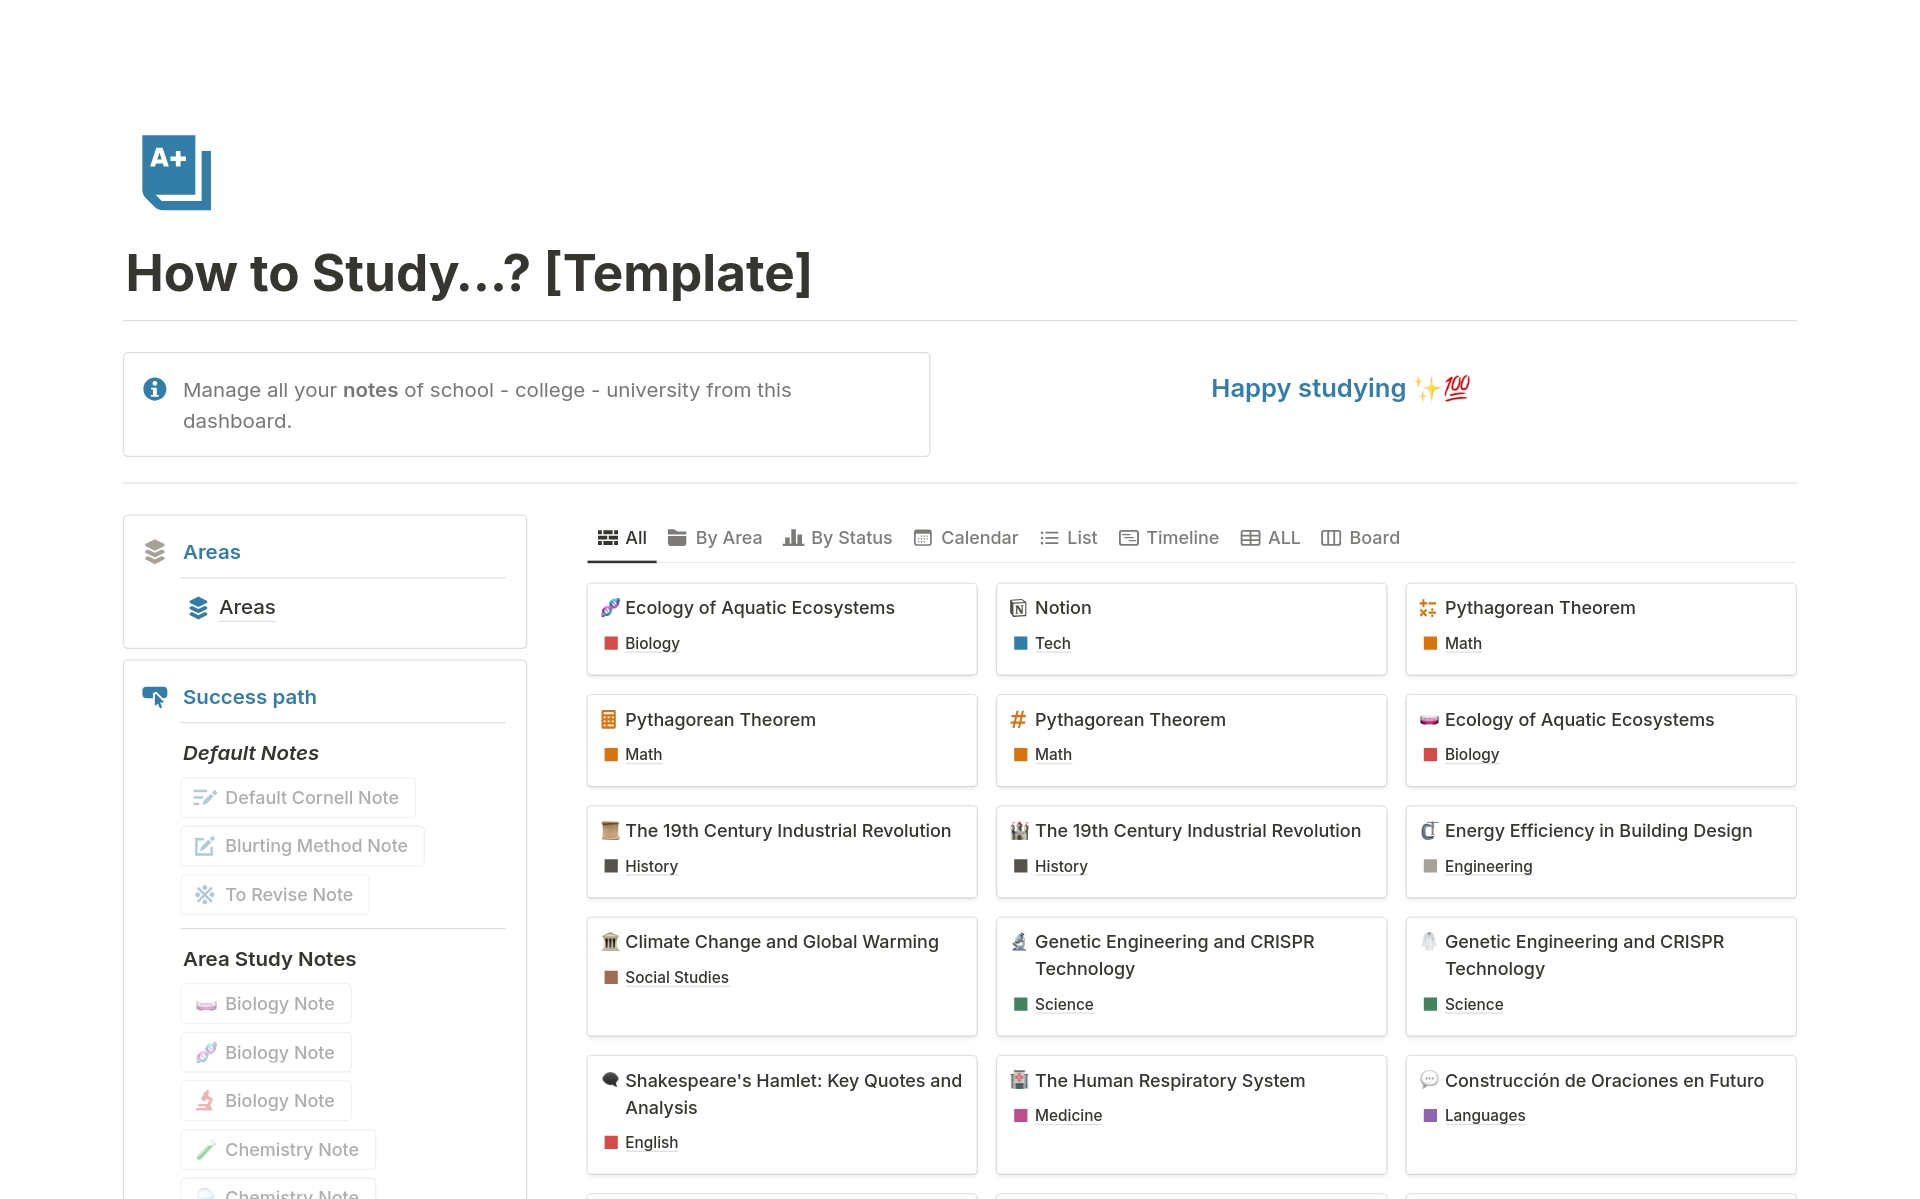 This template provides a comprehensive "How to Study…?" guide with diverse Cornell Note-taking, Blurting Method Note templates for subjects like History, Science, Math, English, Medicine, Languages, and more, all powered by Notion AI and Notion Automations. 